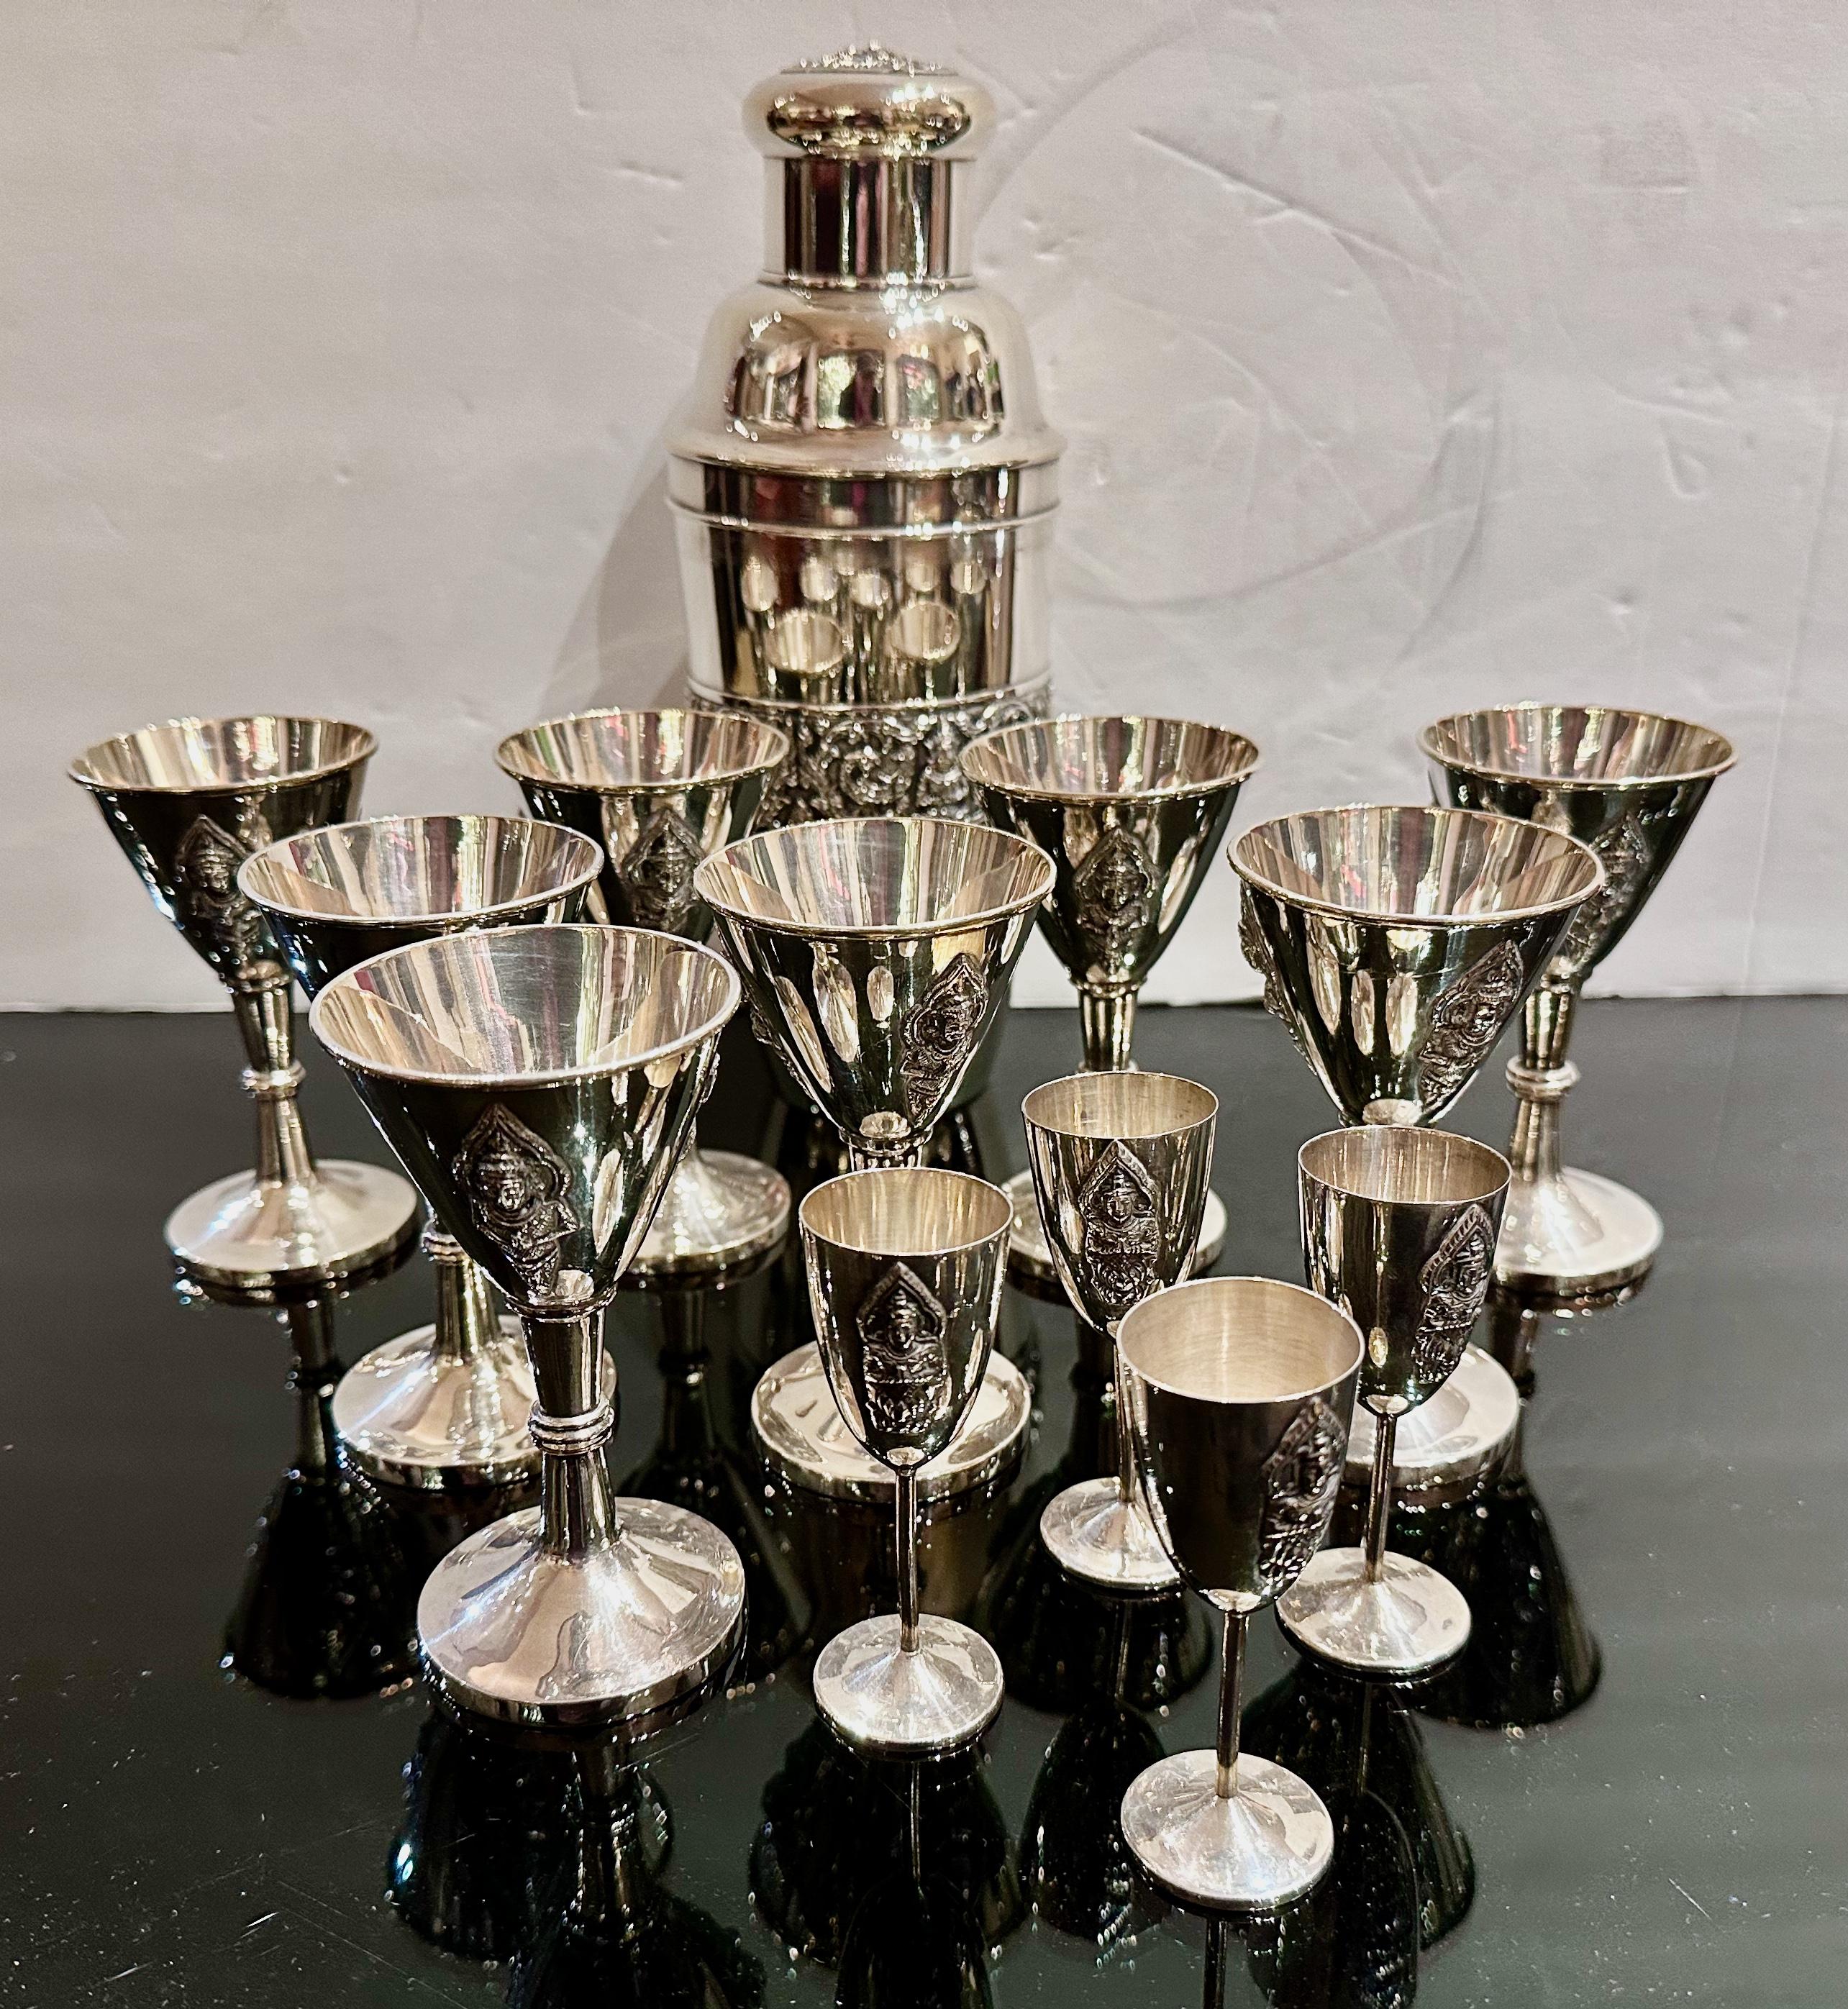 This exceptional cocktail shaker set, marked “Alex and Co Sterling 950,” comprises a shaker and 12 glasses, all in excellent condition. Crafted in Siam (now Thailand) from sterling silver, the set is a testament to exquisite craftsmanship. Adorned